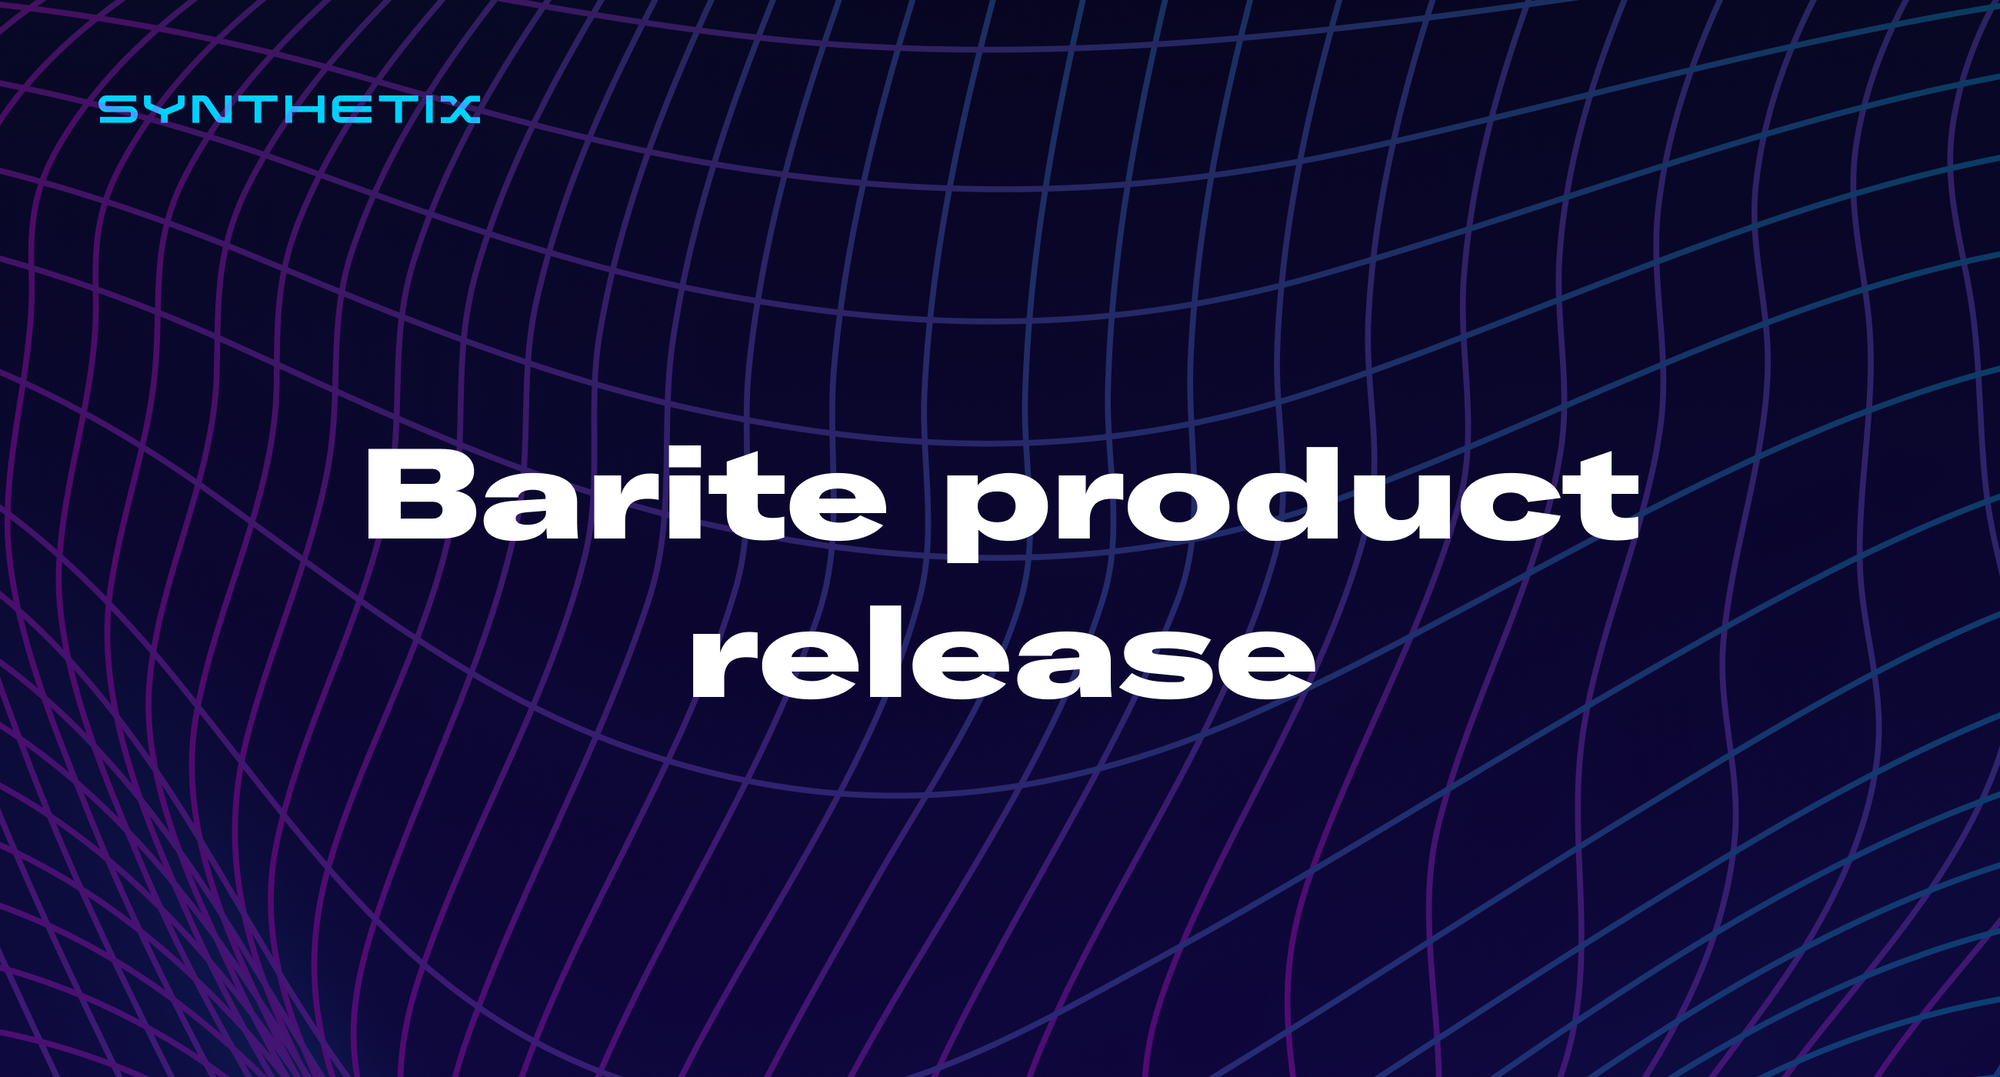 Barite product release